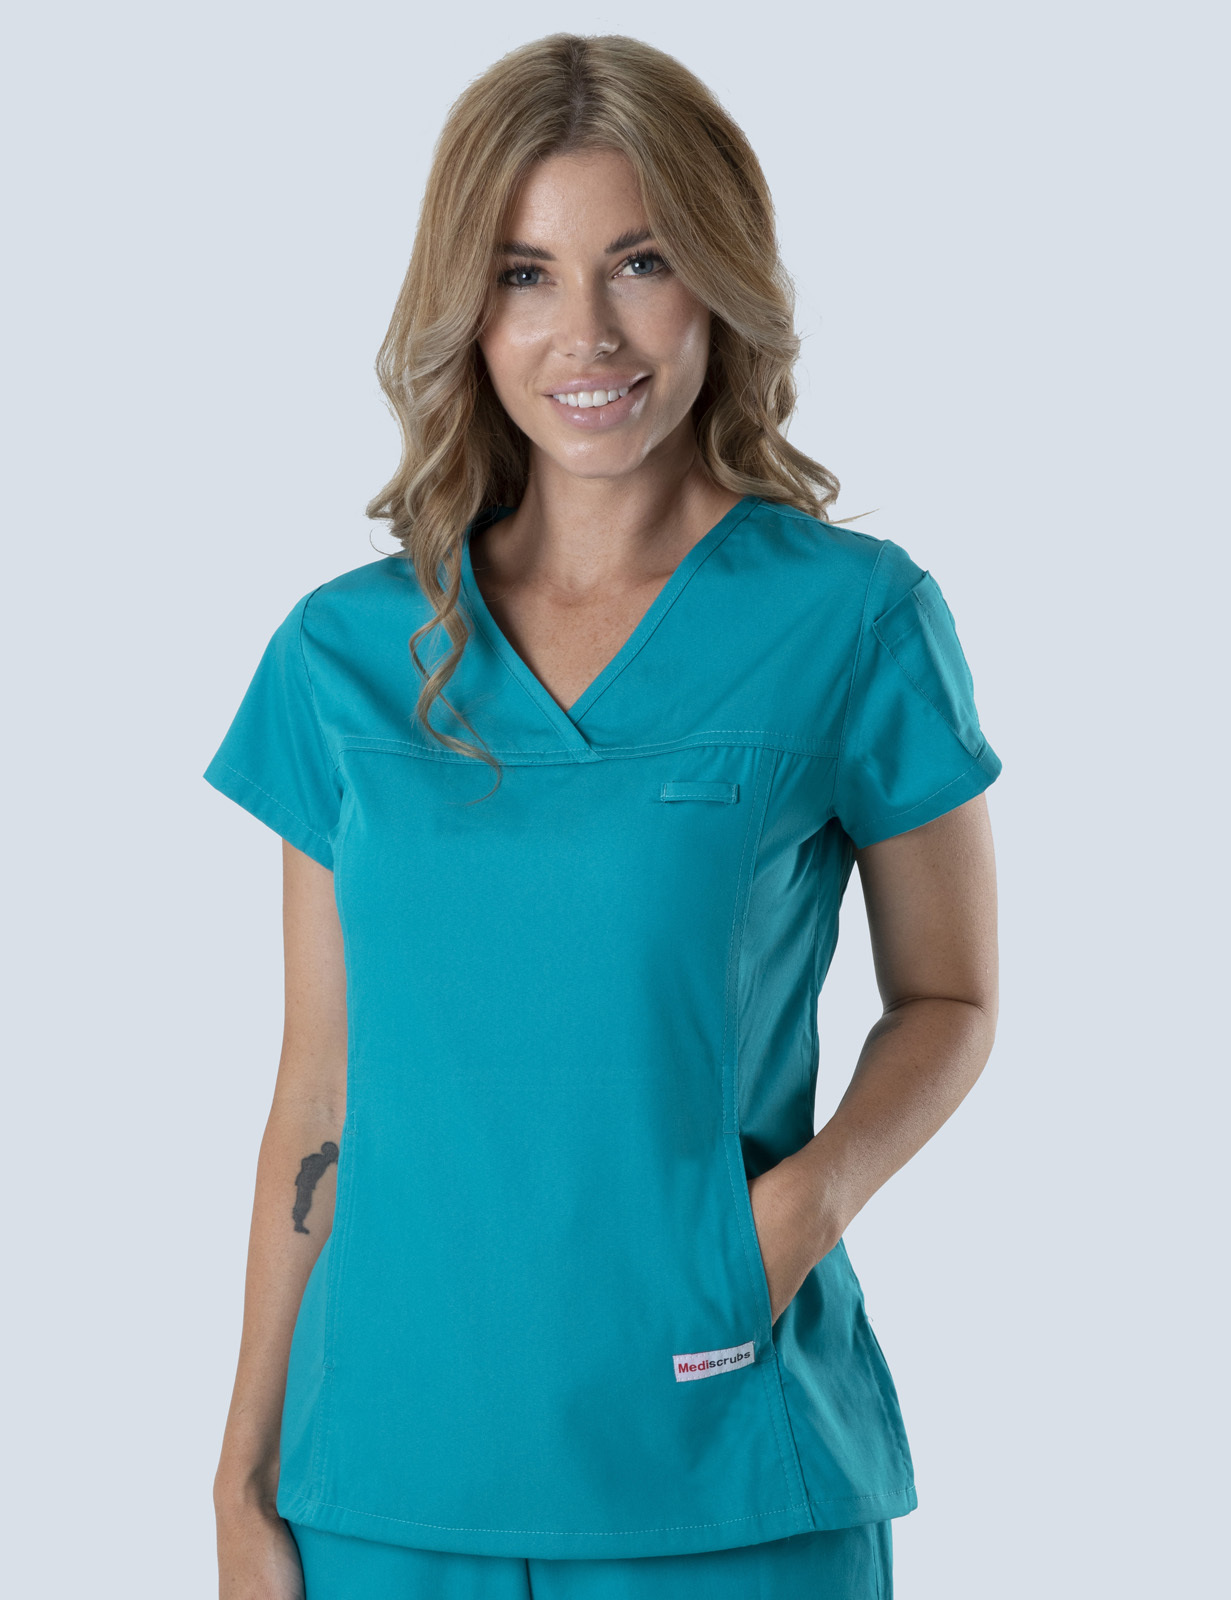 Women's Fit Solid Scrub Top - Teal - X Large